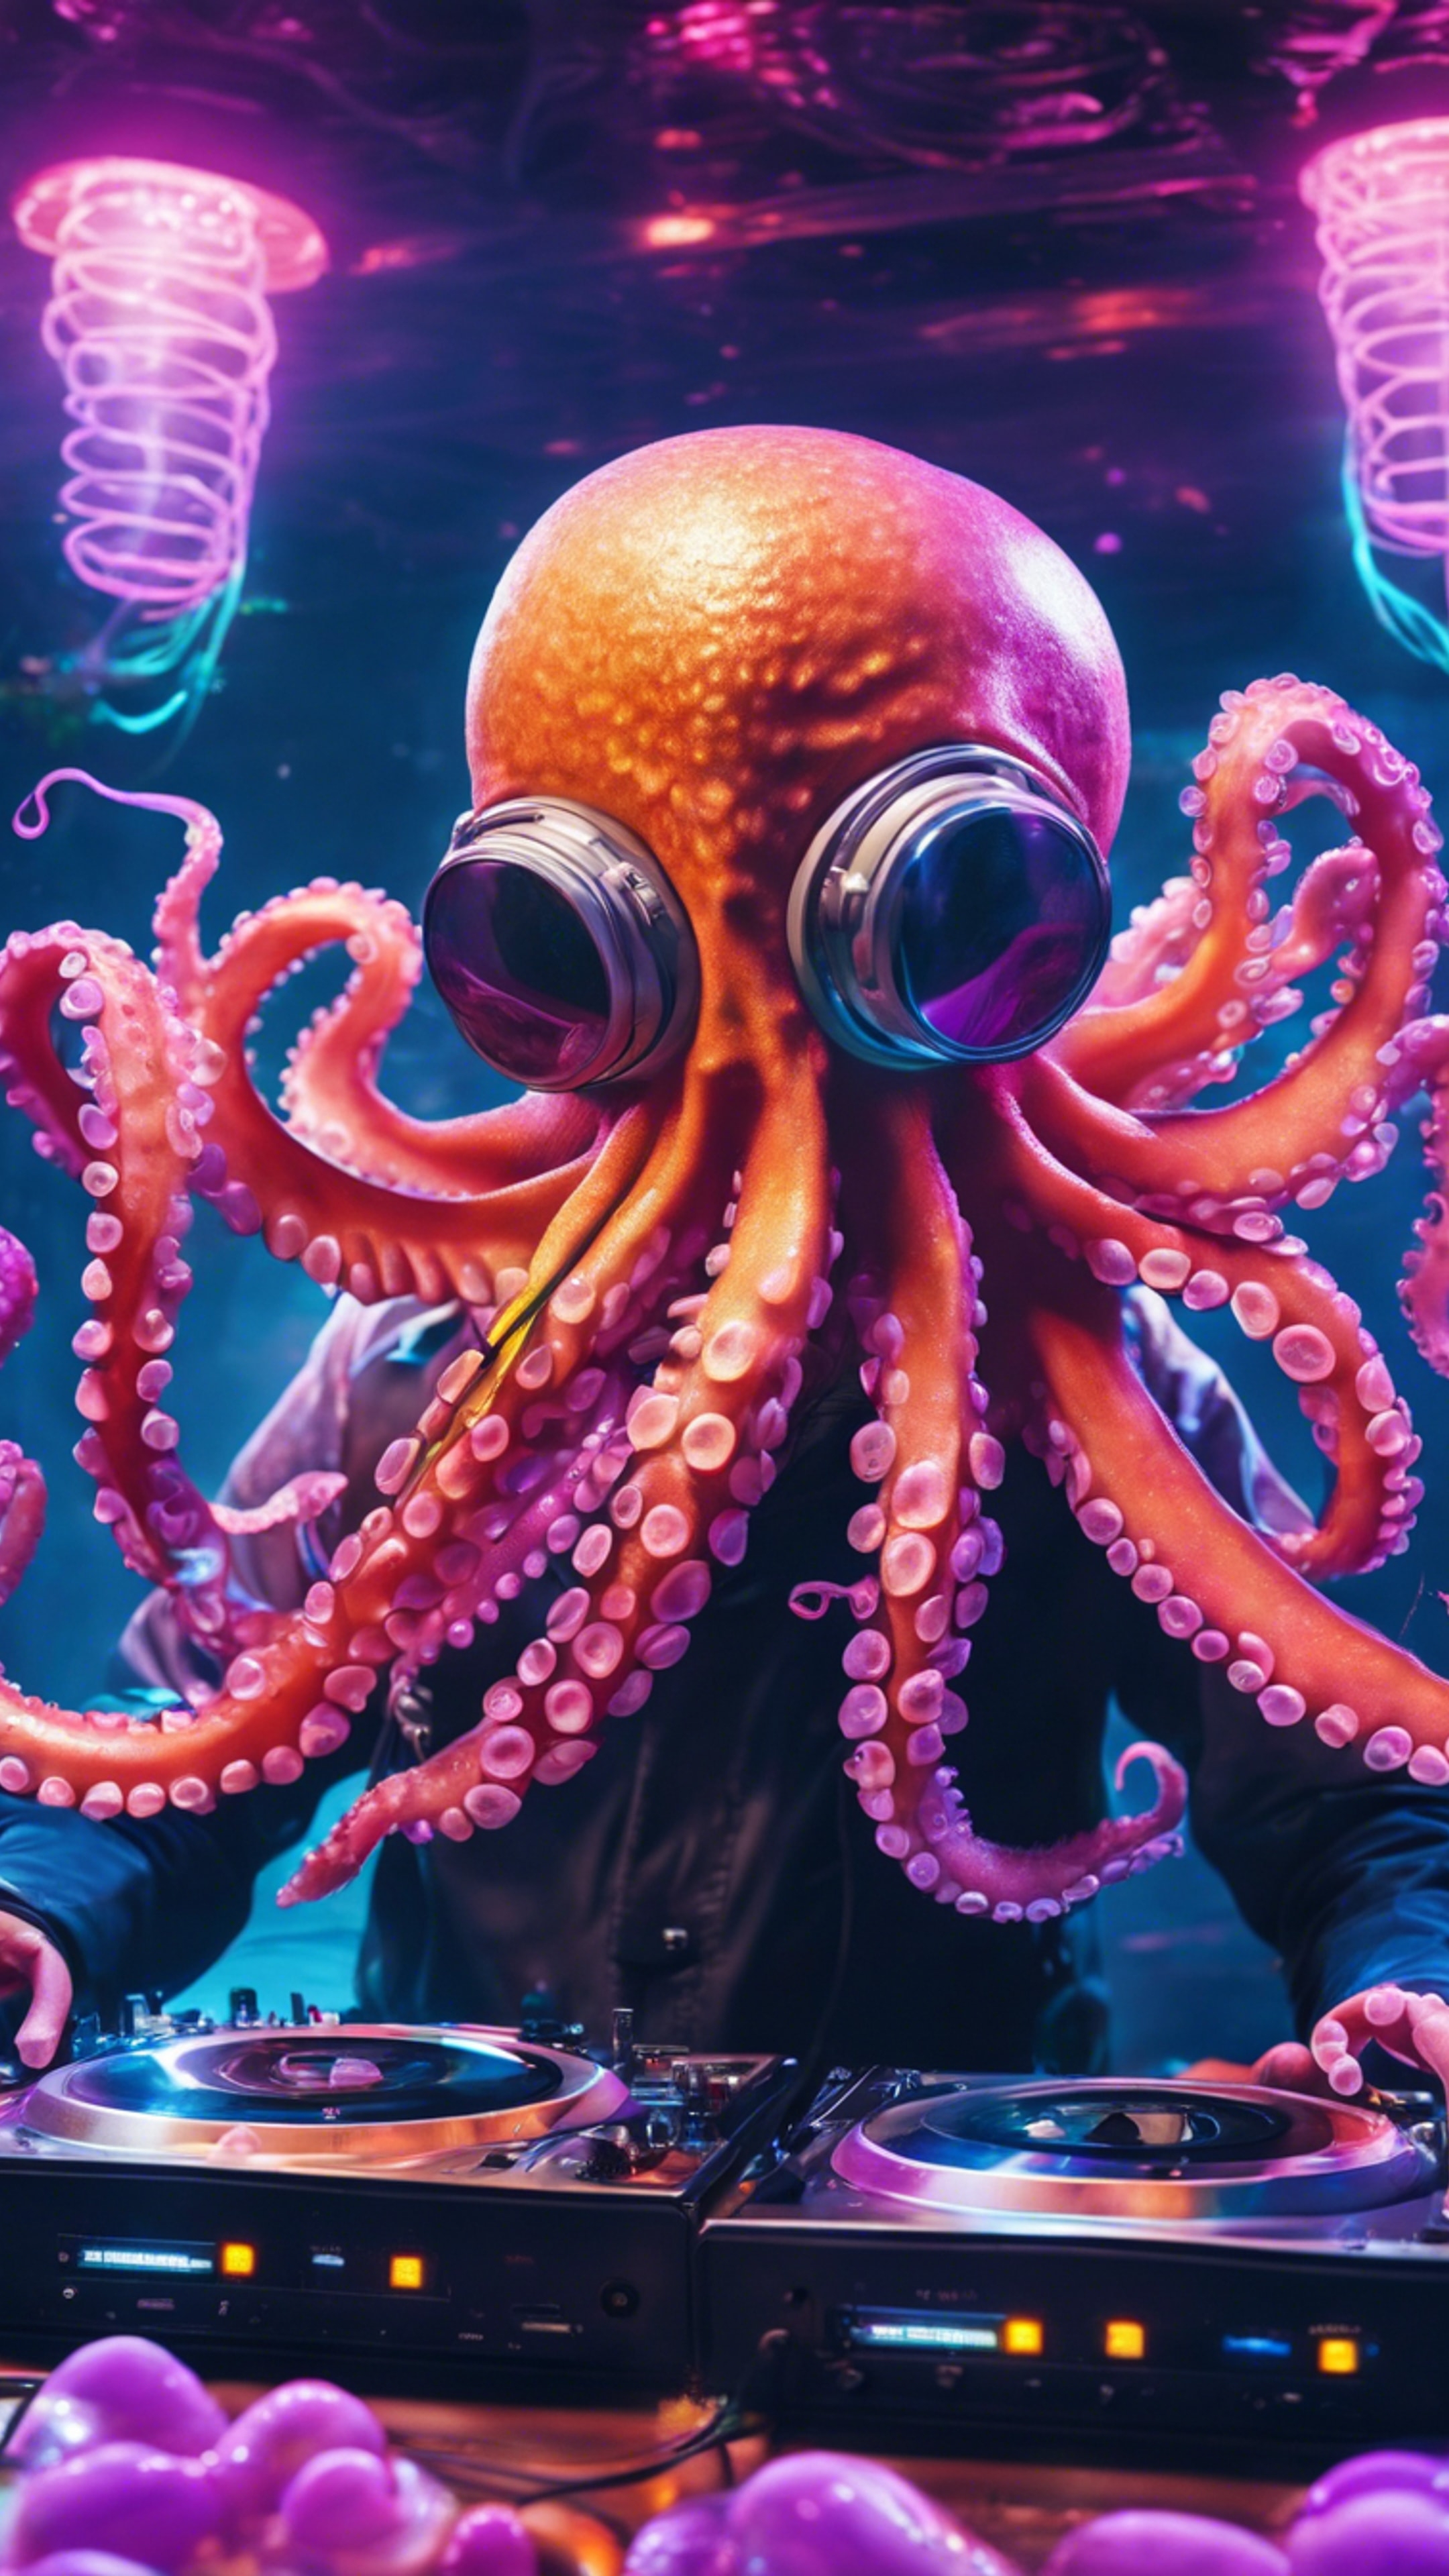 An octopus DJ controlling the music at an underwater rave amidst neon jellyfish. ផ្ទាំង​រូបភាព[8d0f478d59094f5192d2]